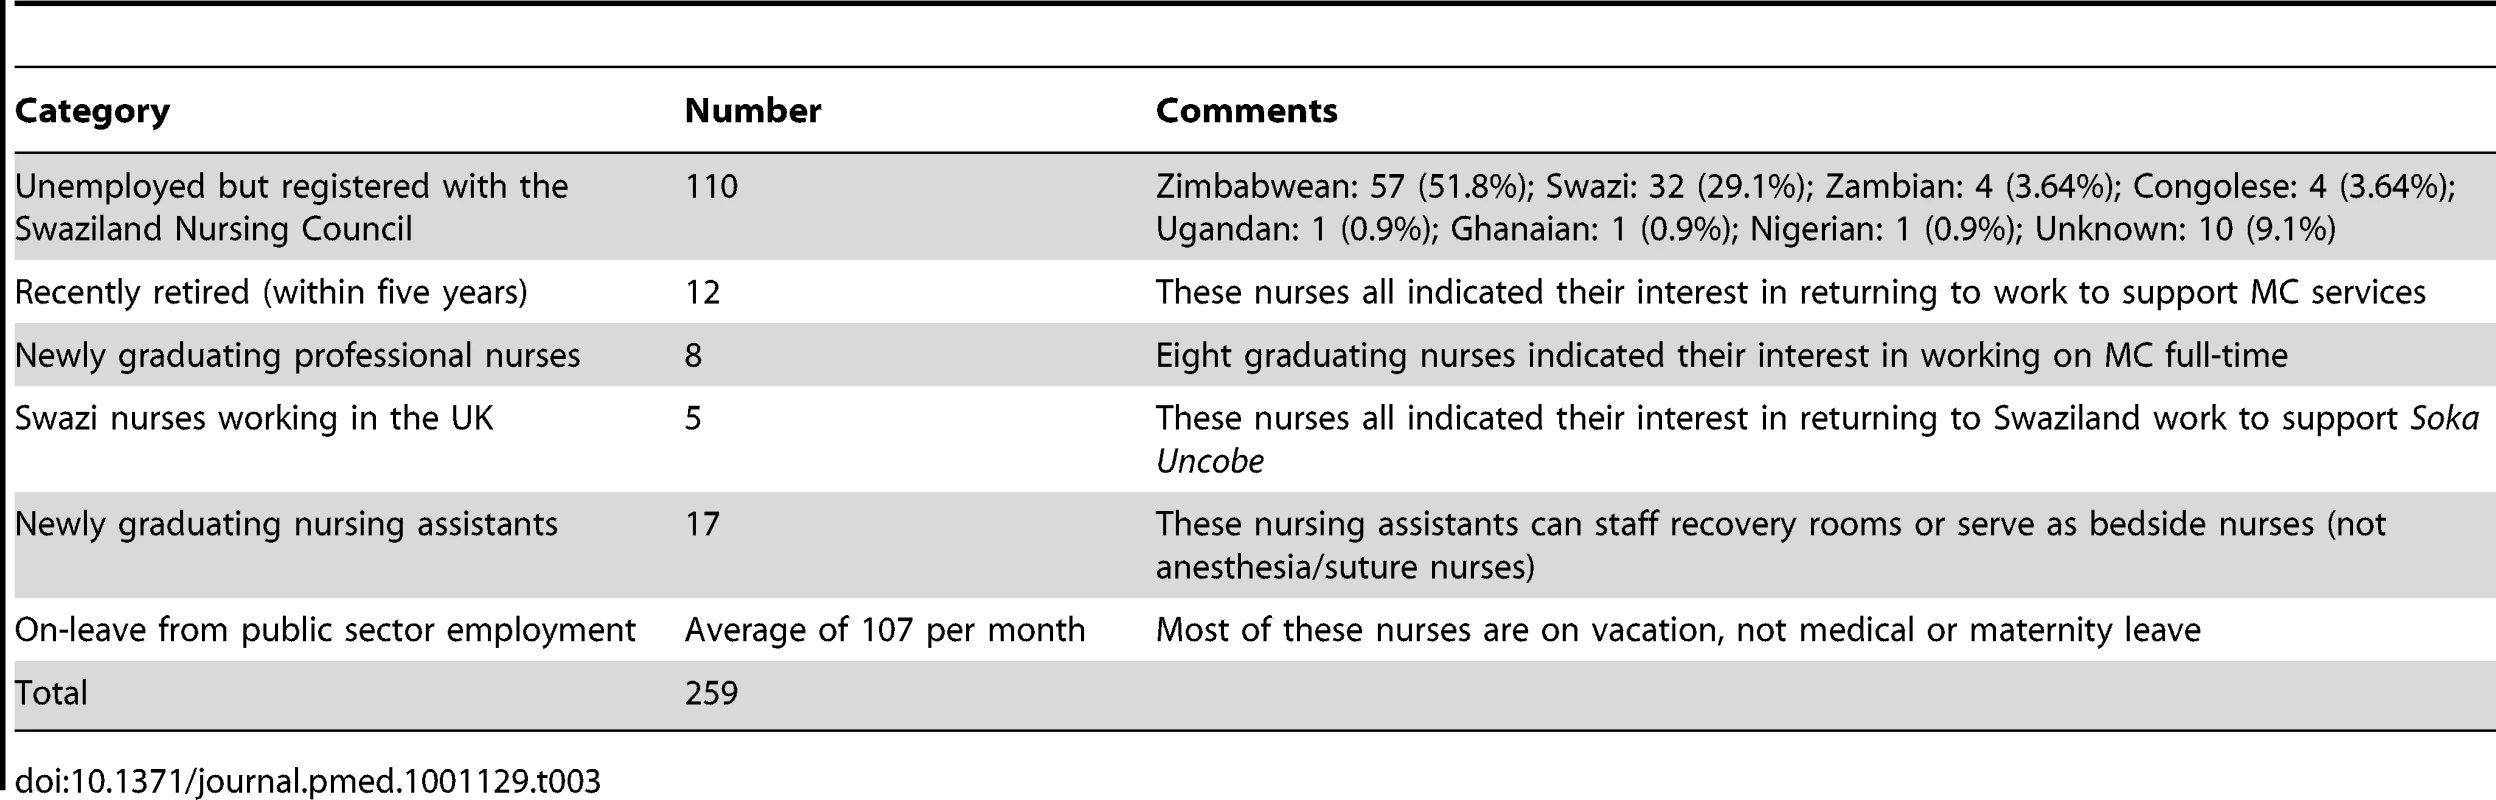 Quantification of the nursing workforce in the Kingdom of Swaziland.